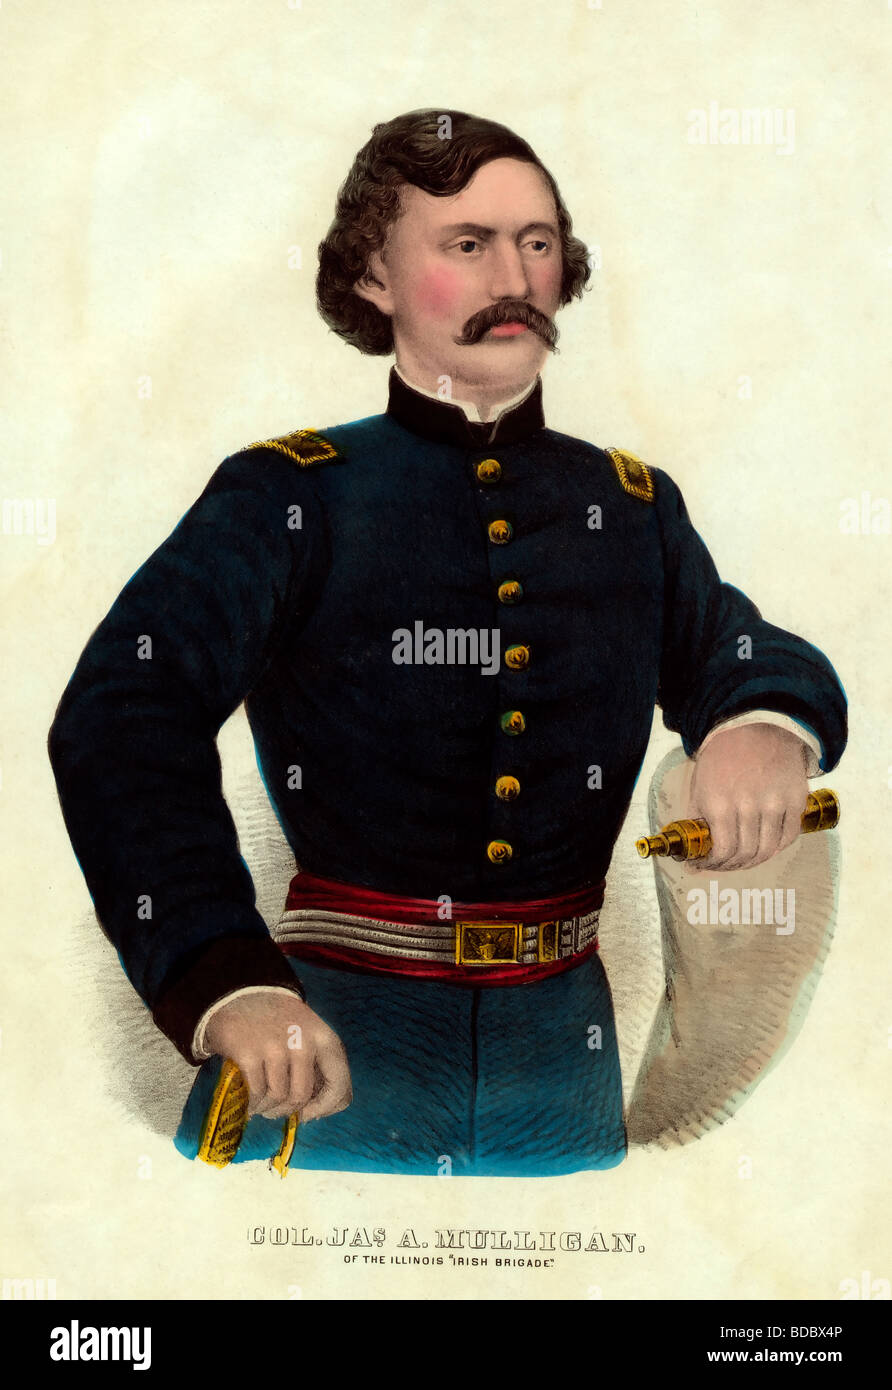 Colonel  James A. Mulligan Of the Illinois 'Irish Brigade', who was killed in action on July 24,1864 in the USA Civil War Stock Photo